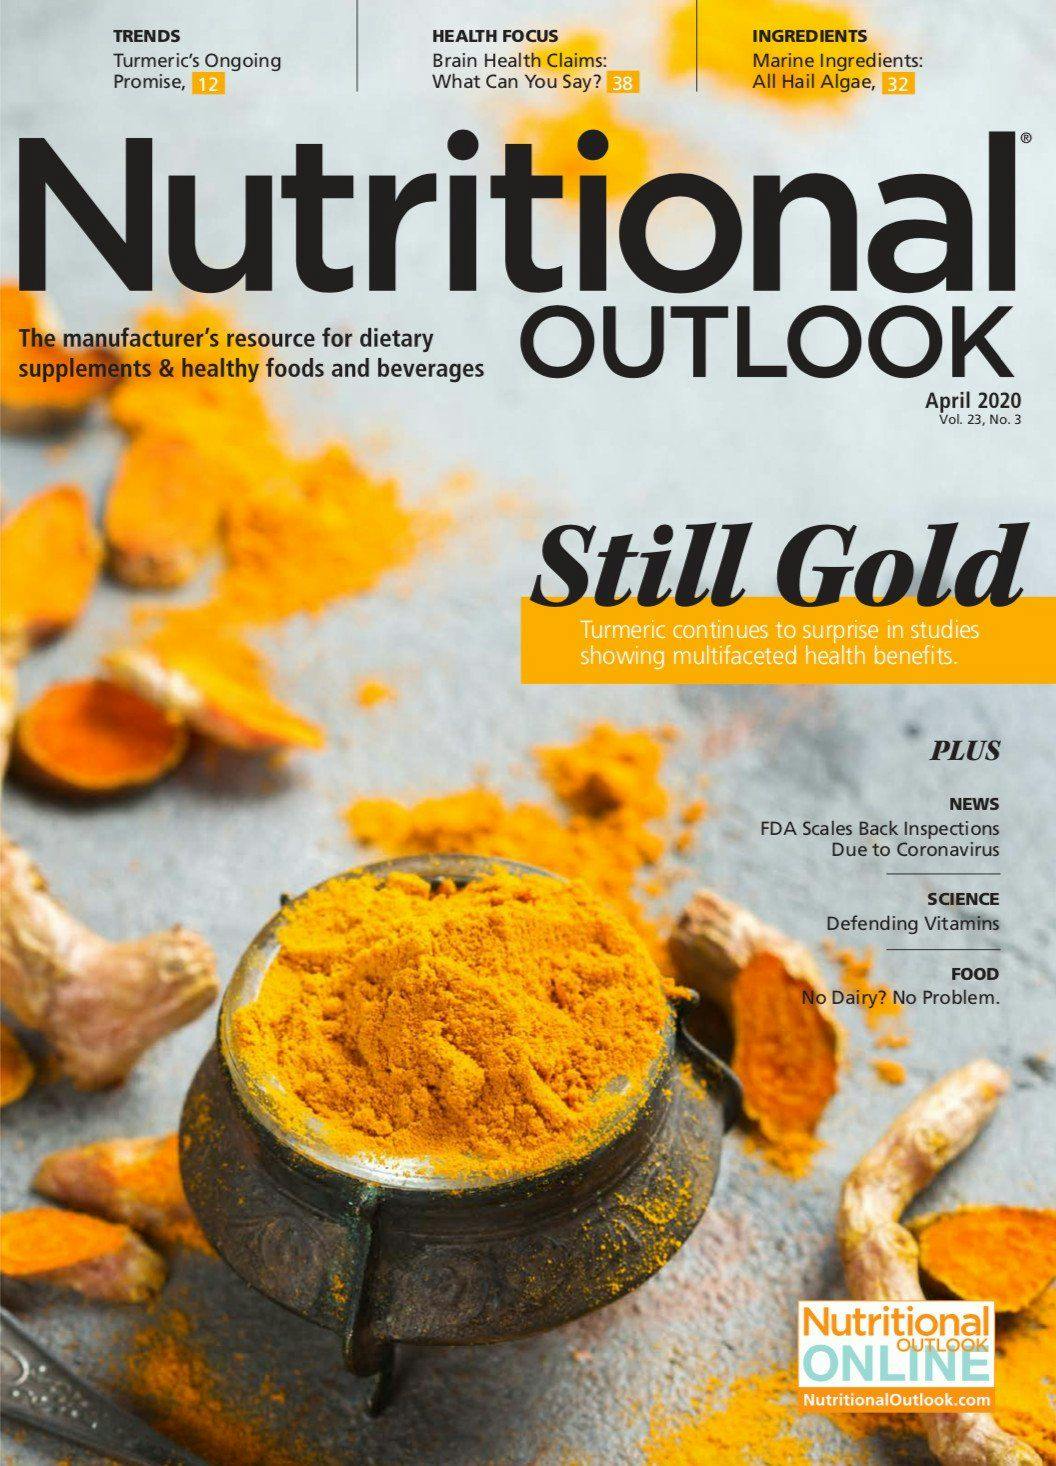 Nutritional Outlook Vol. 23 No. 3